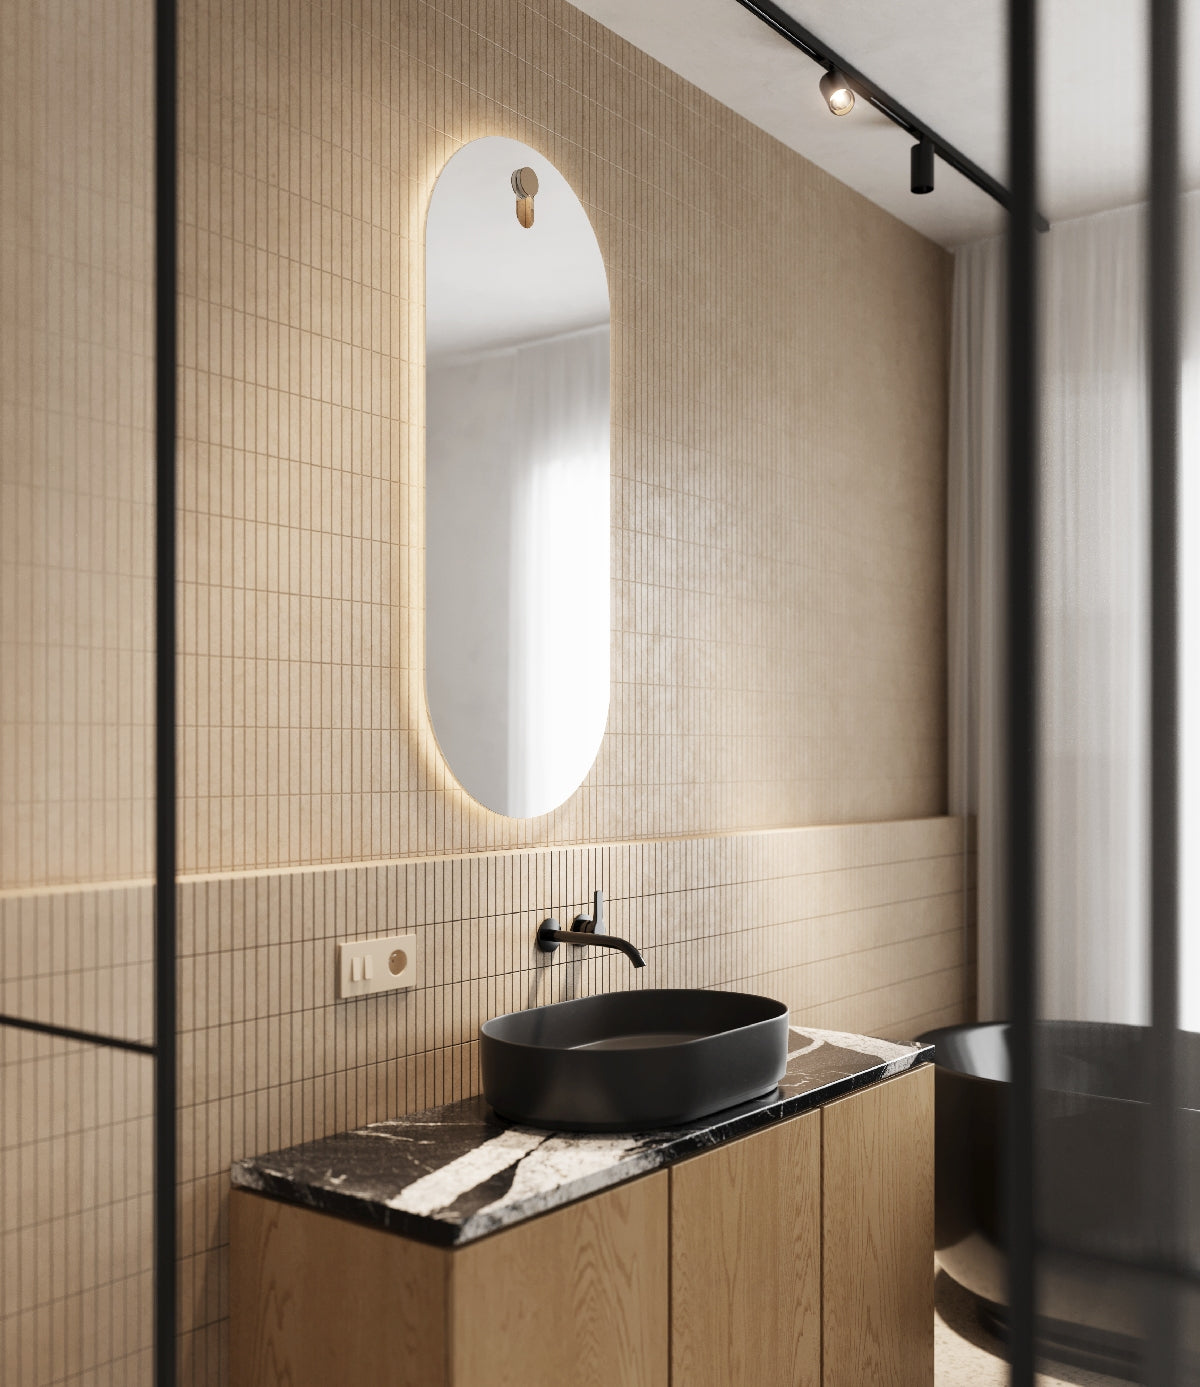 New luxurious bathroom mirrors from ARTISAN.